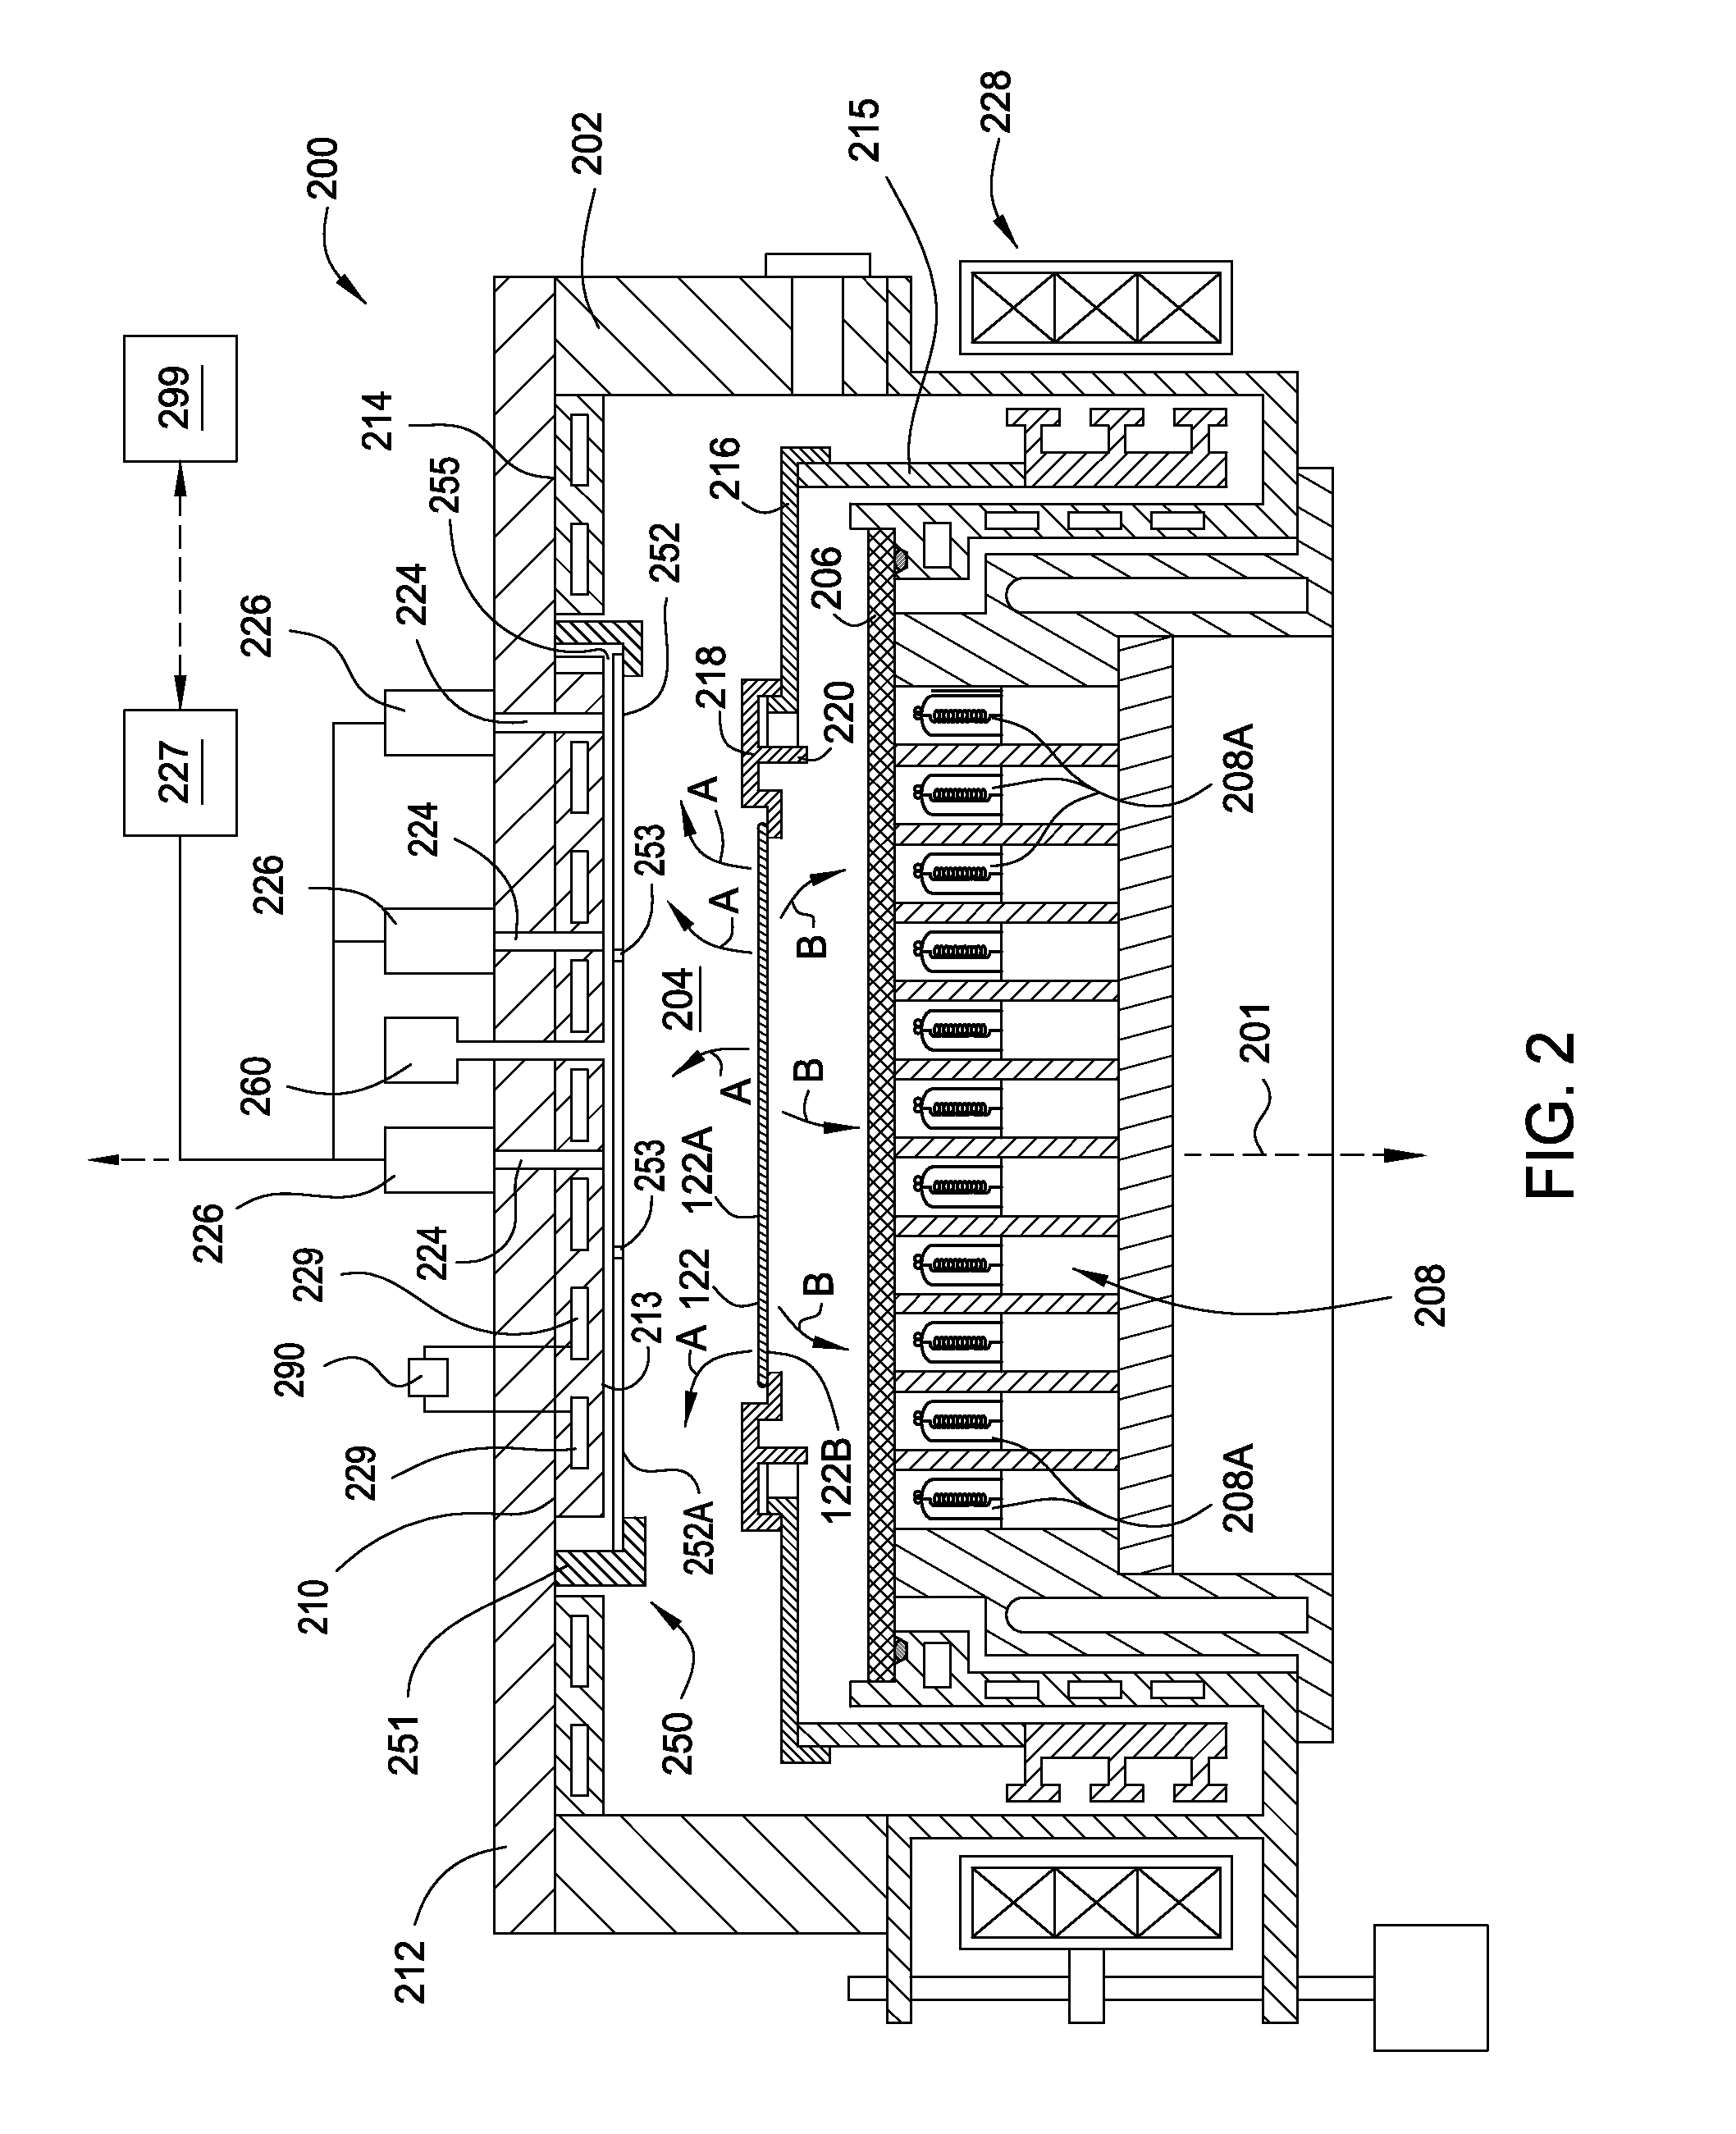 Apparatus for reducing the effect of contamination on a rapid thermal process